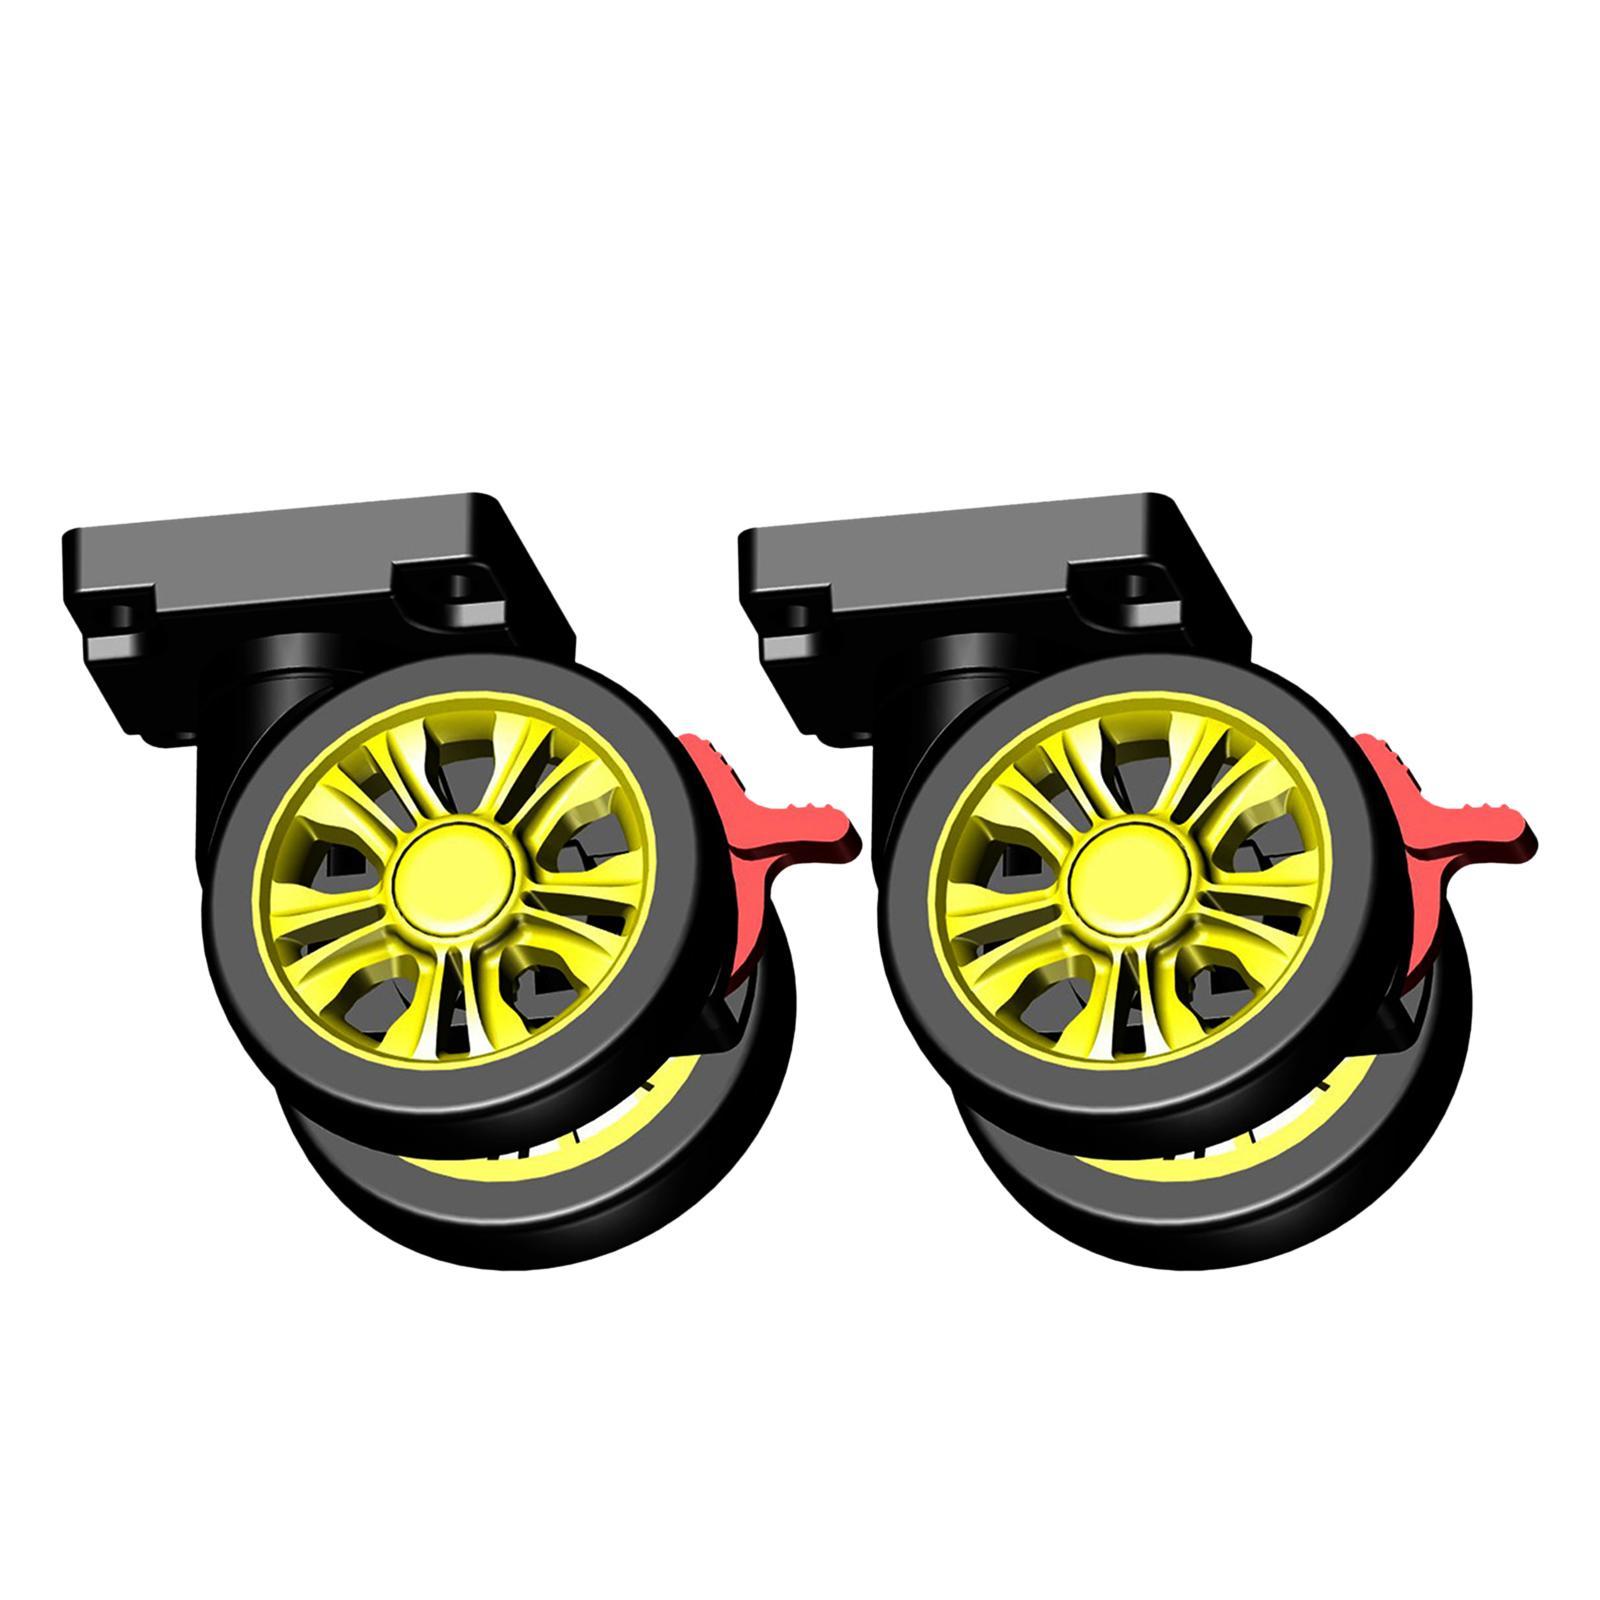 2x Luggage Suitcase Replacement Wheels with Brake Durable for Suitcase